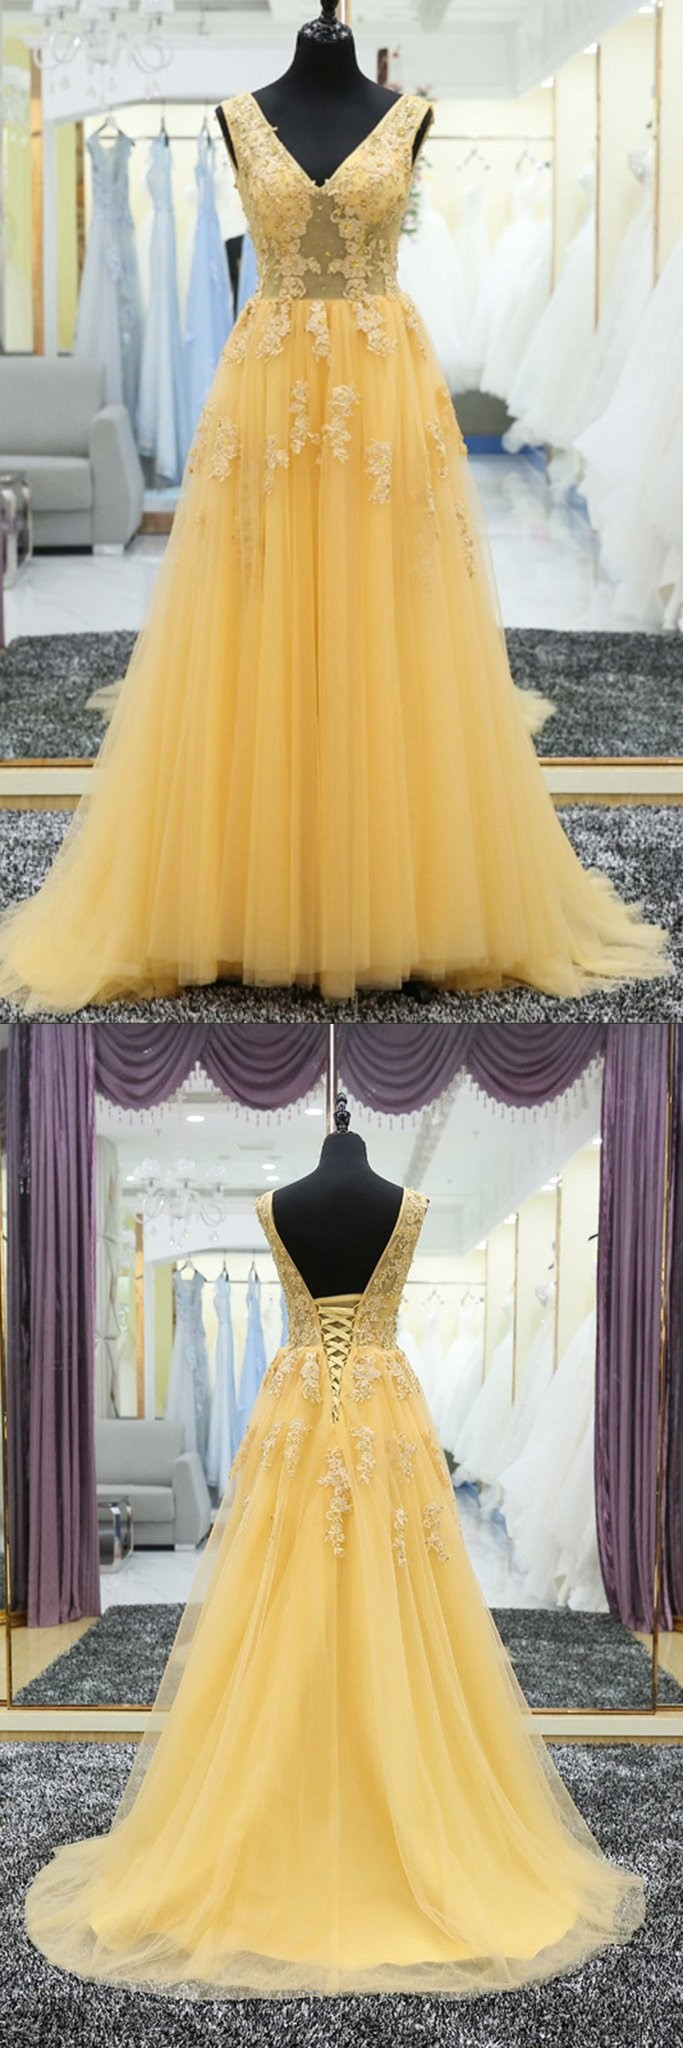 Yellow Tulle Tulle Lace Applique V-neck Long Prom Dress, Evening ...